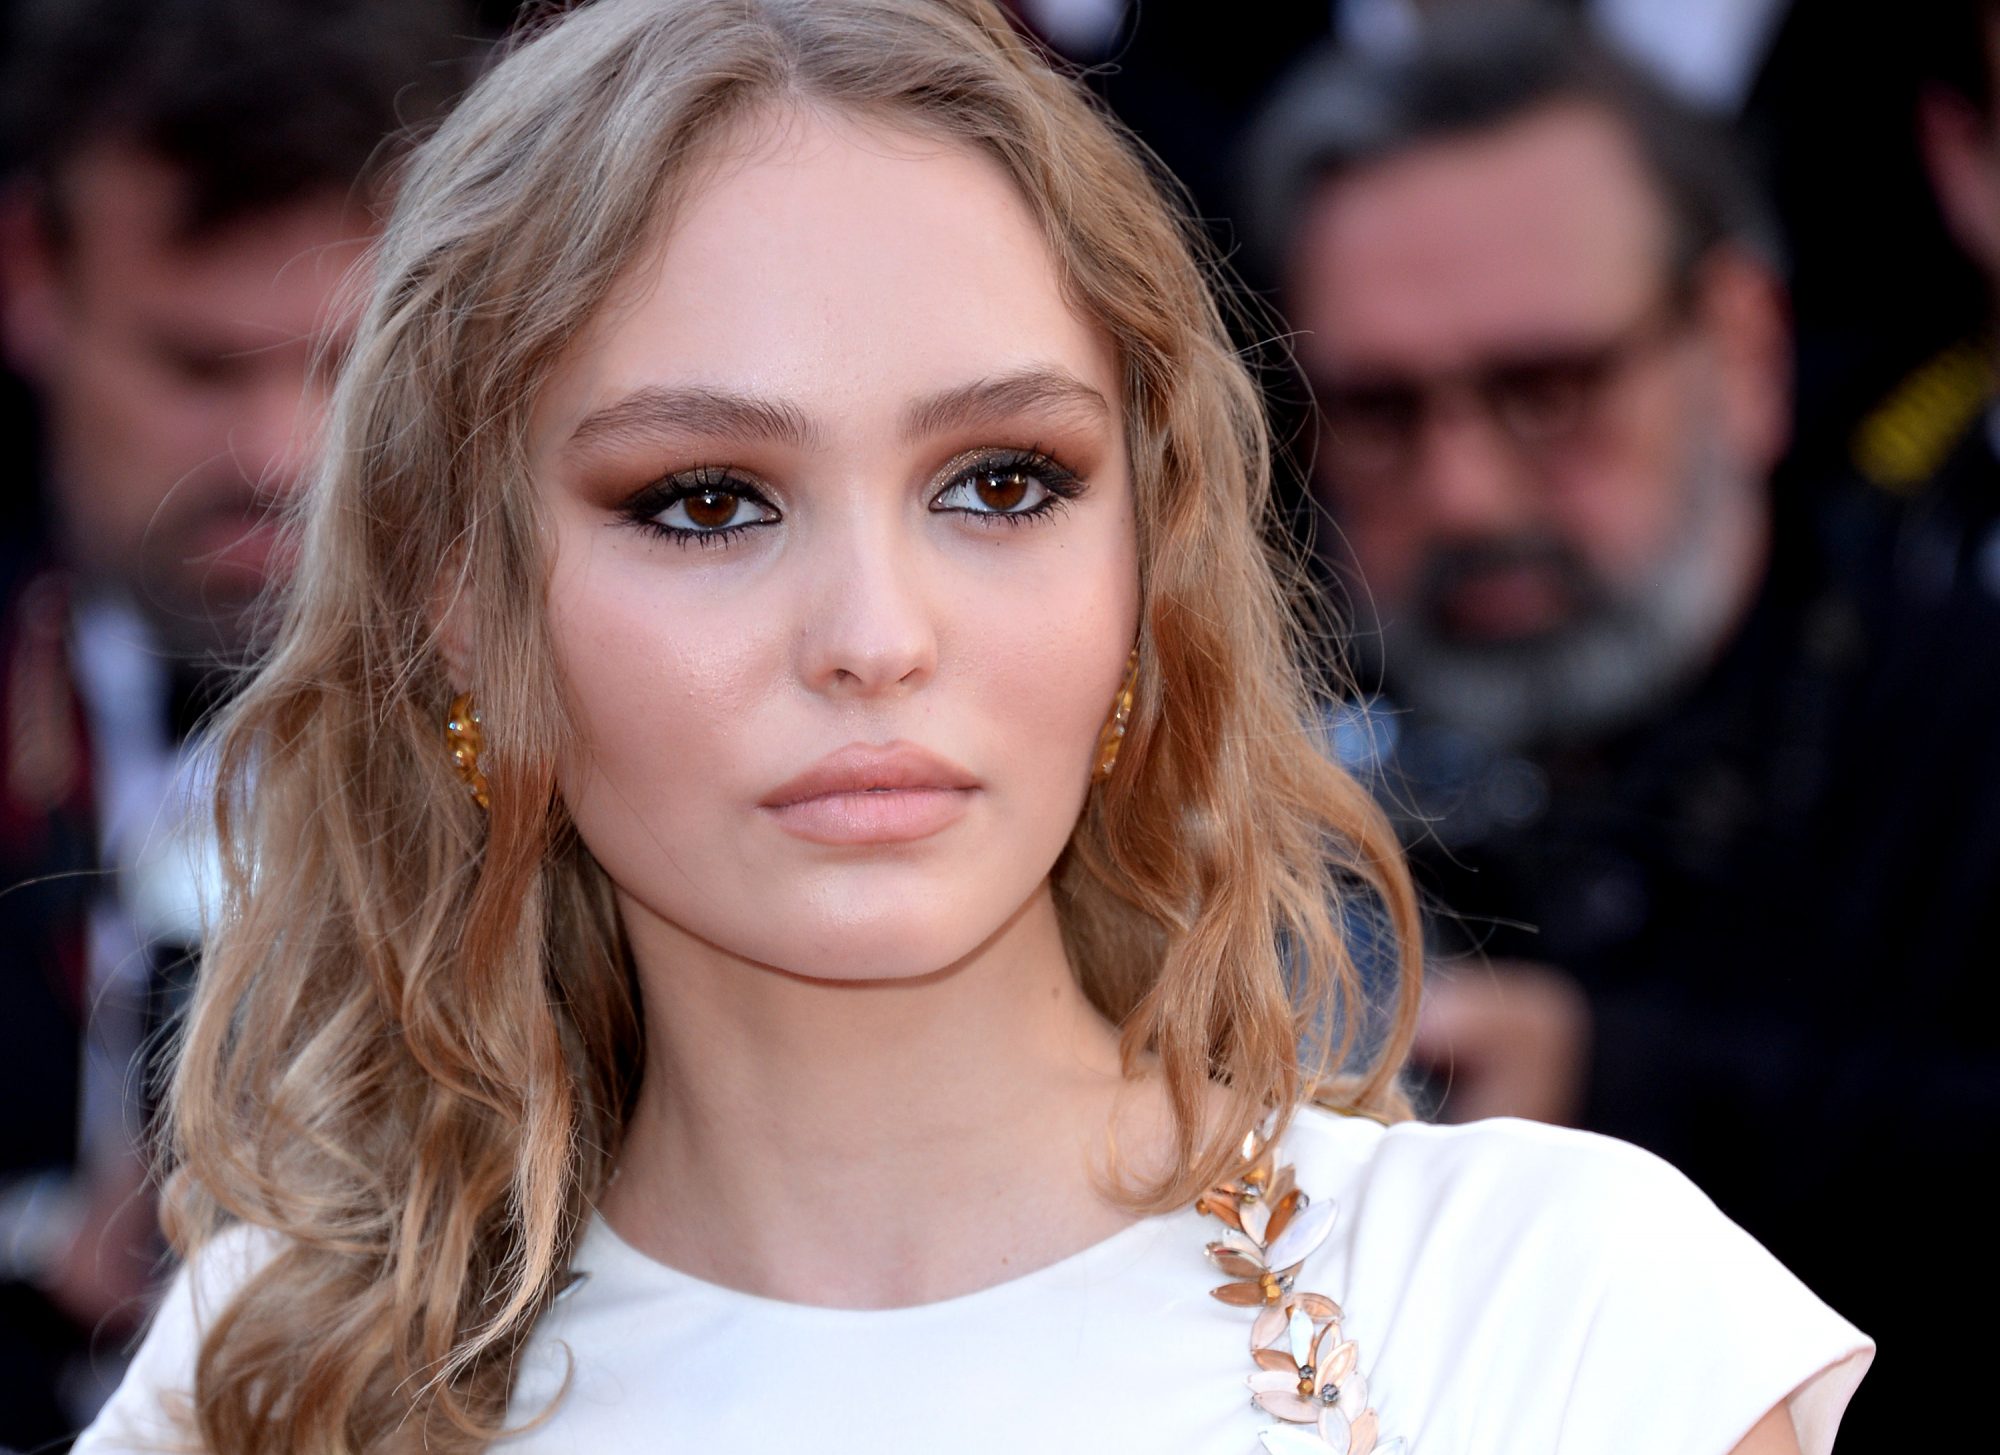 How To Recreate Lily-Rose Depp's Smoky Eye In 3 Easy Steps